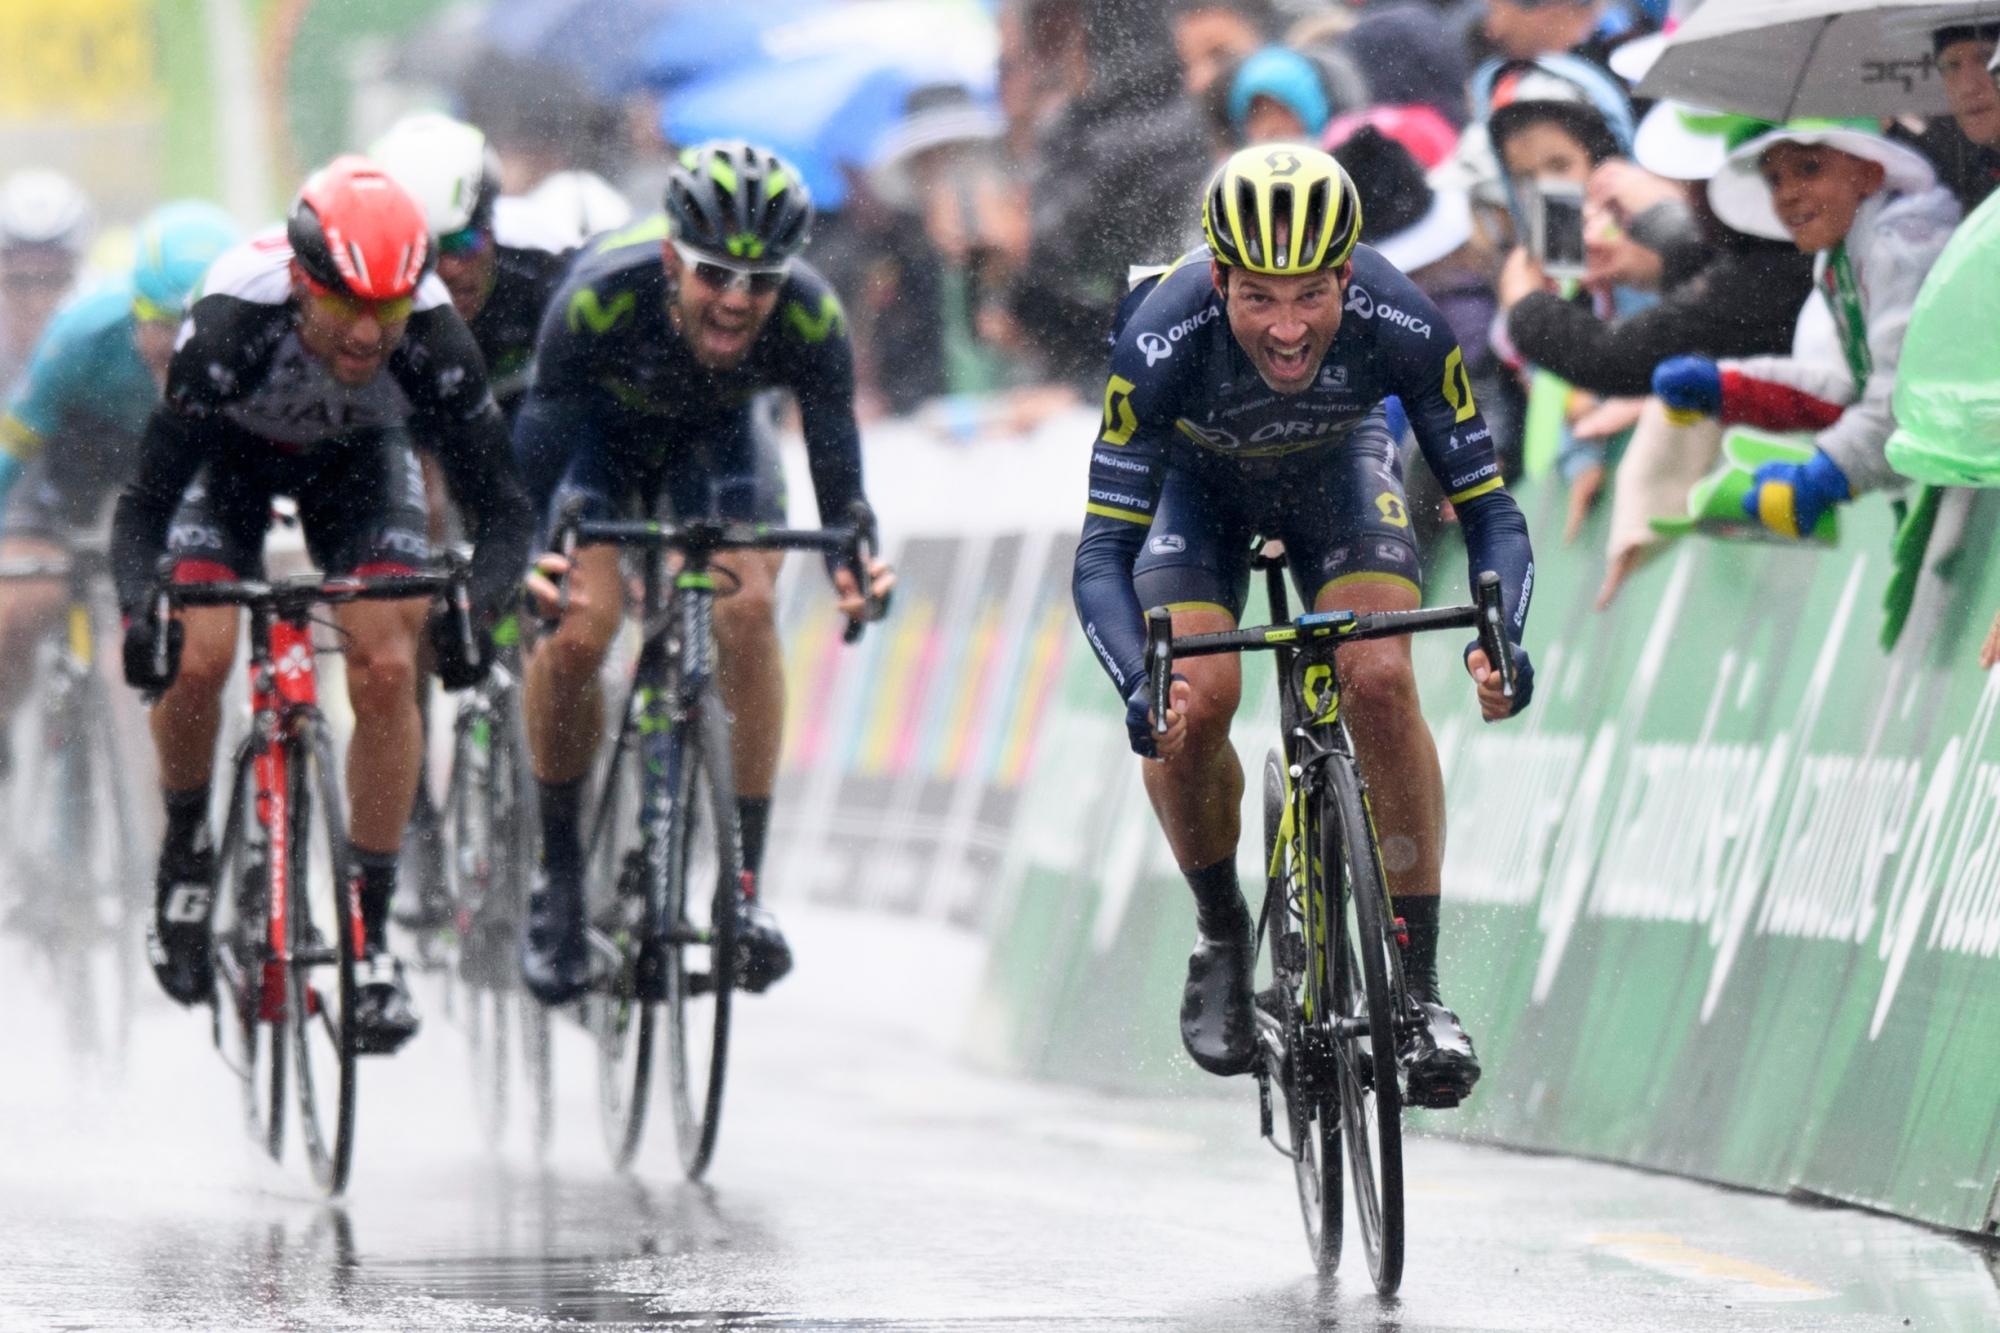 Michael Albasini, right, from Switzerland of team Orica-Scott cross the finish line to win the first stage, a 173.3 km race between Aigle and Champery at the 71th Tour de Romandie UCI ProTour cycling race in Champery, Switzerland, Wednesday, April 26, 2017. (KEYSTONE/Laurent Gillieron) SWITZERLAND CYCLING TOUR DE ROMANDIE